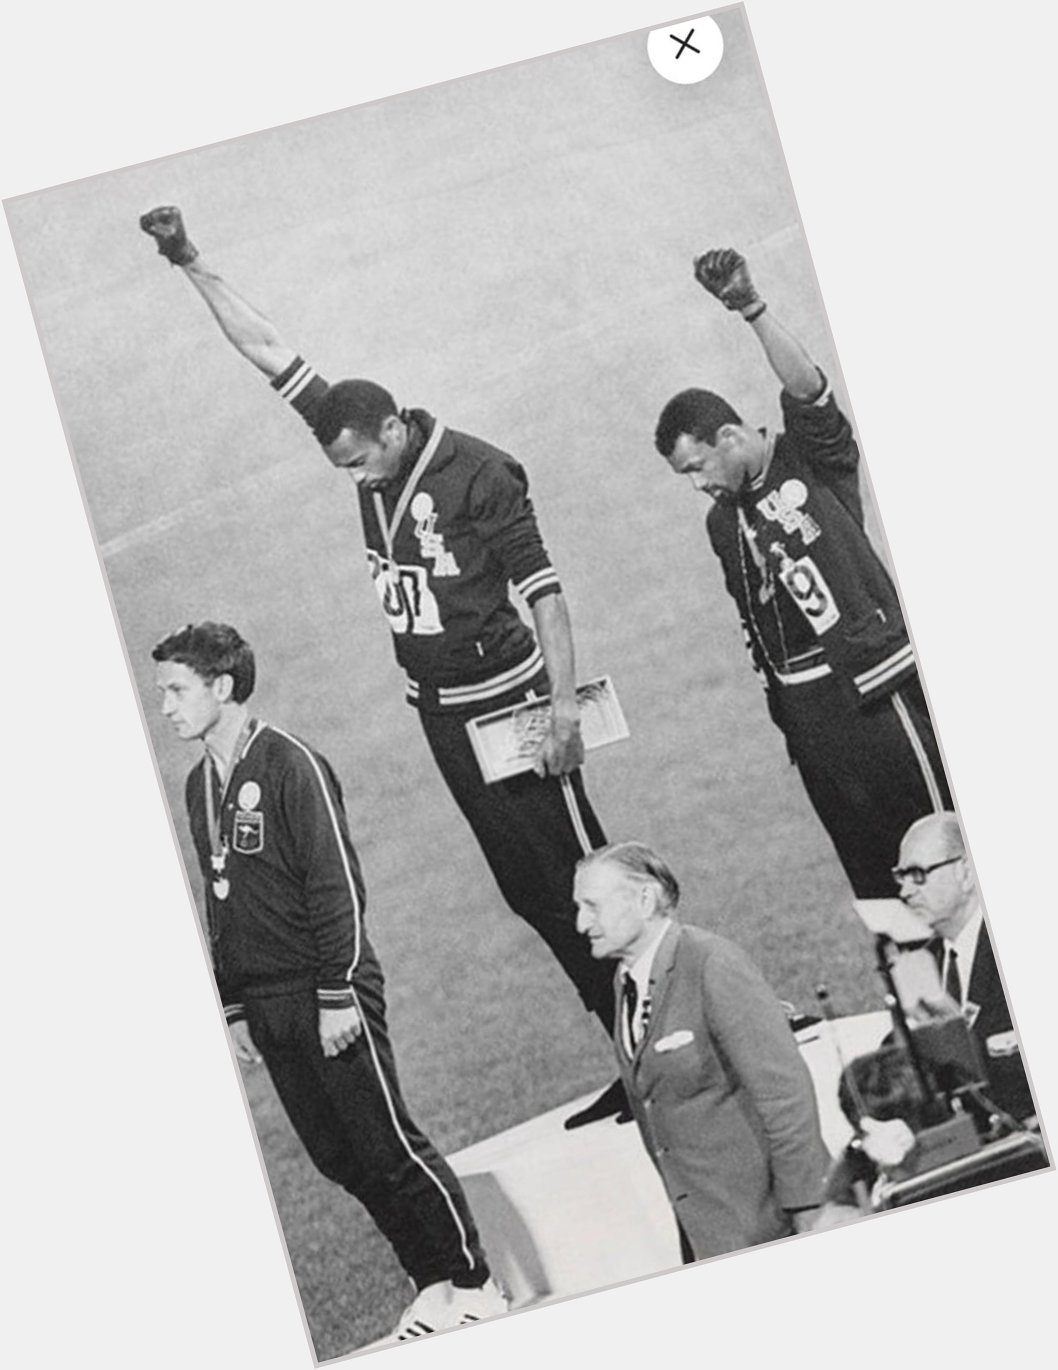 Happy 76th birthday to Tommy Smith. Silent protest with John Carlos at 1968 Olympics. 